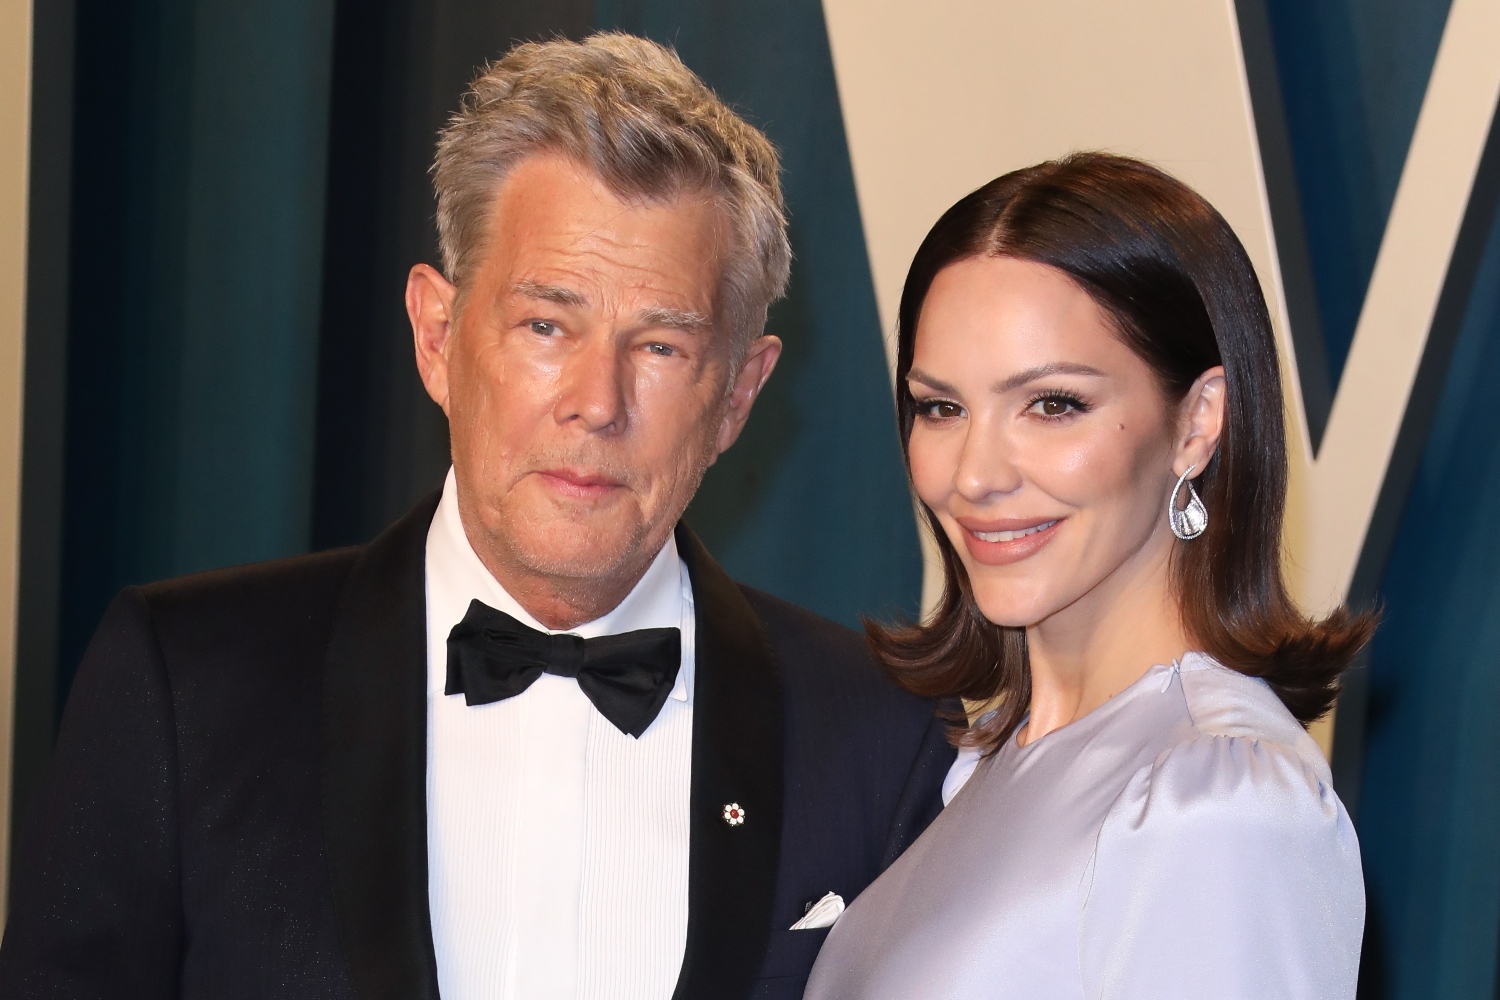 Katharine McPhee and David Foster attend the 2020 Vanity Fair Oscar Party at Wallis Annenberg Center for the Performing Arts on February 09, 2020 in Beverly Hills, California.